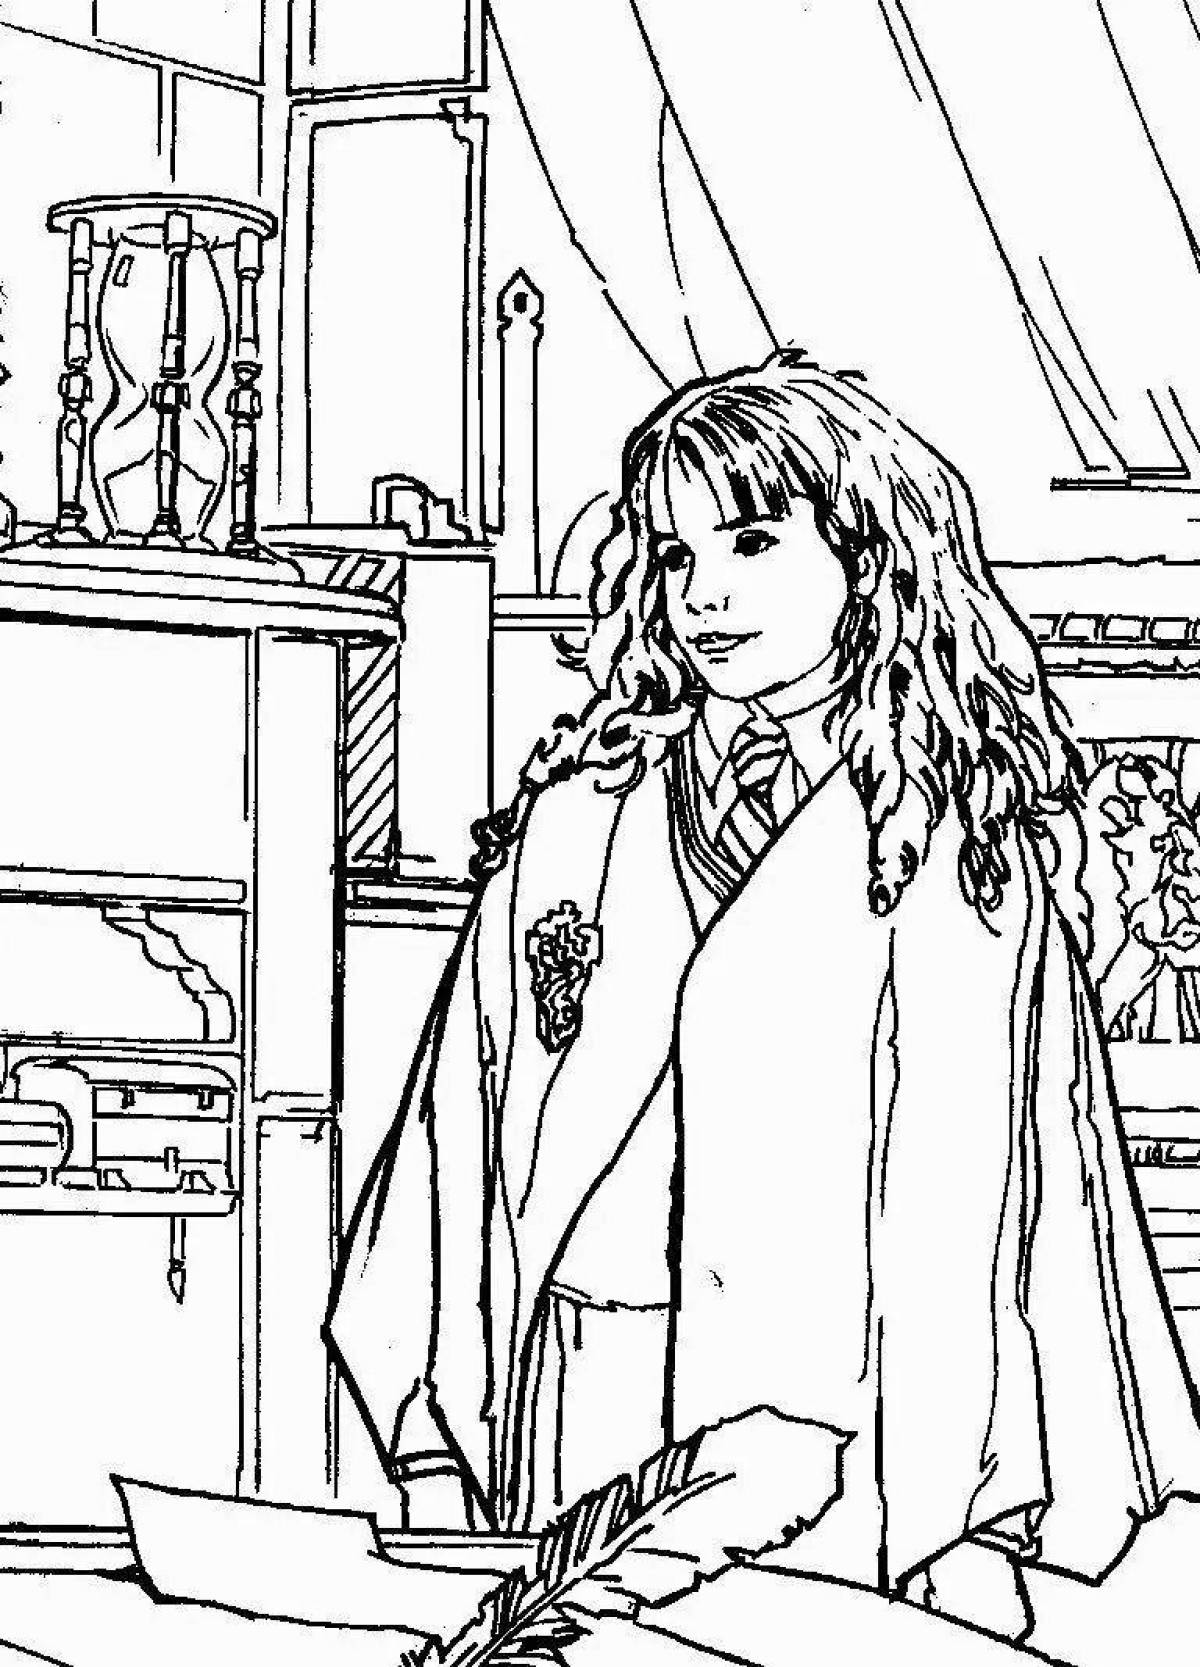 Harry potter creative coloring book for girls